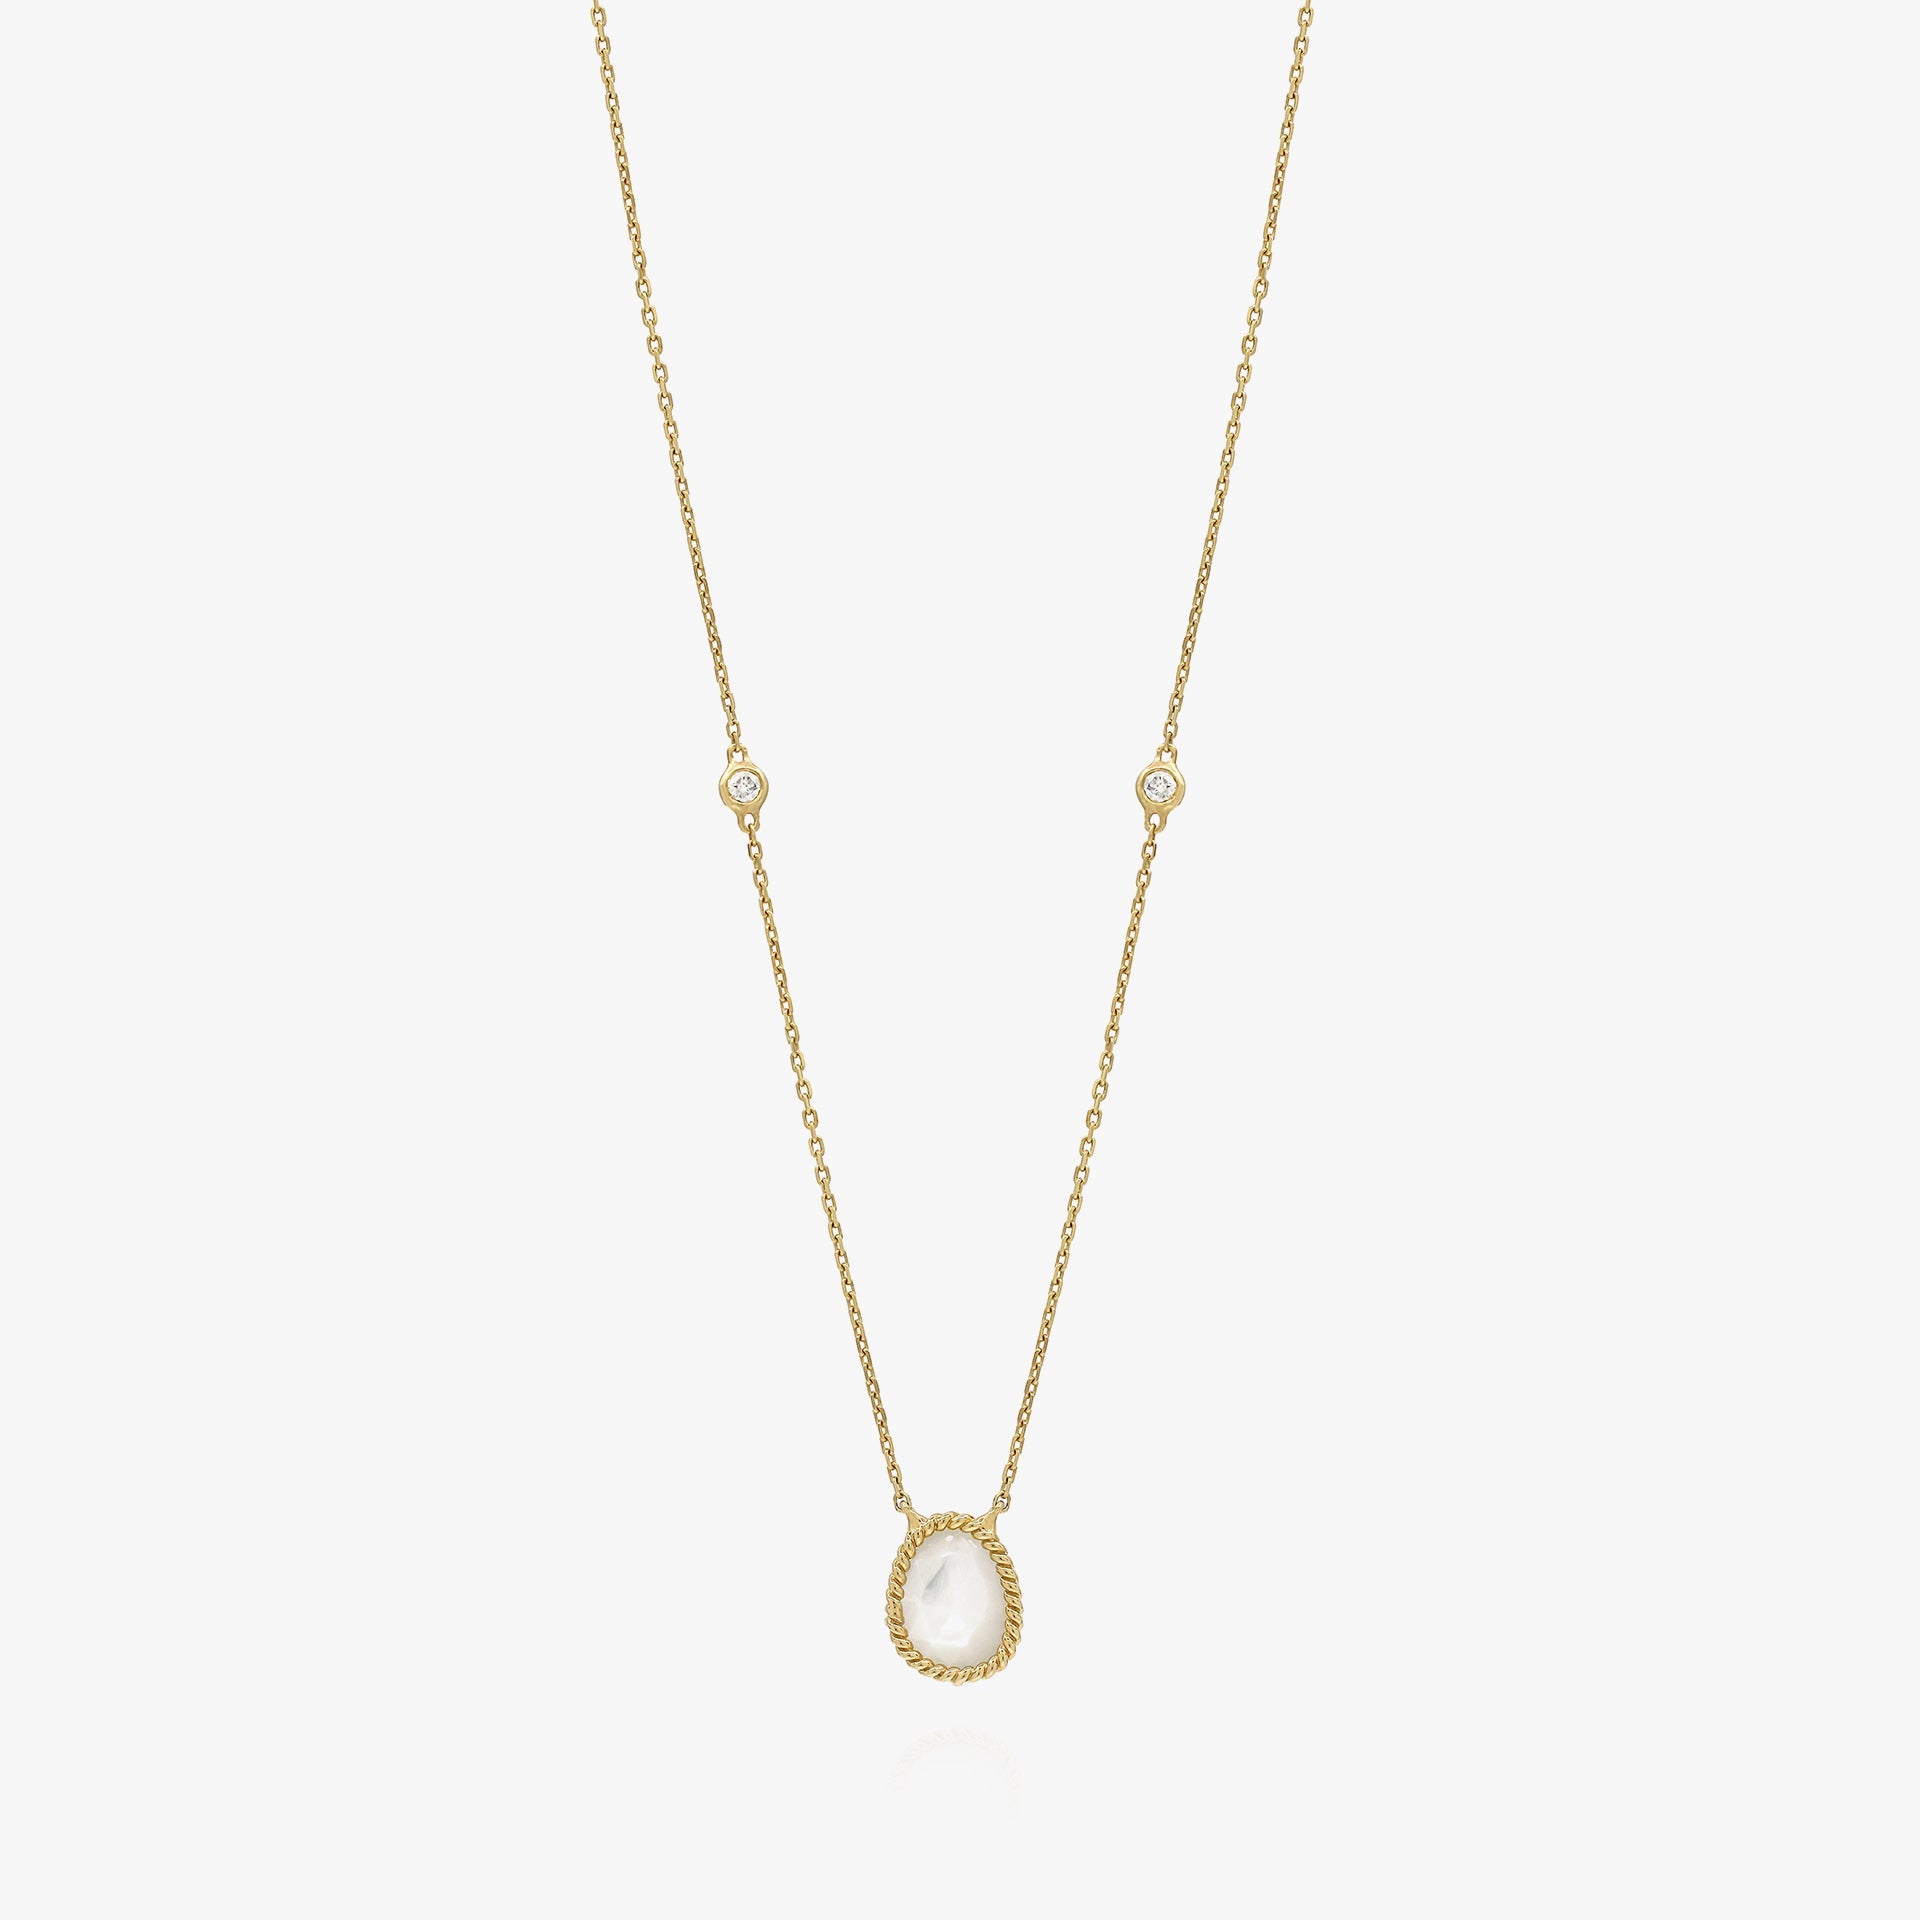 Nina Mariner Necklace In 18 Karat Yellow Gold With Natural White Diamonds And Mother Of Pearl Stone